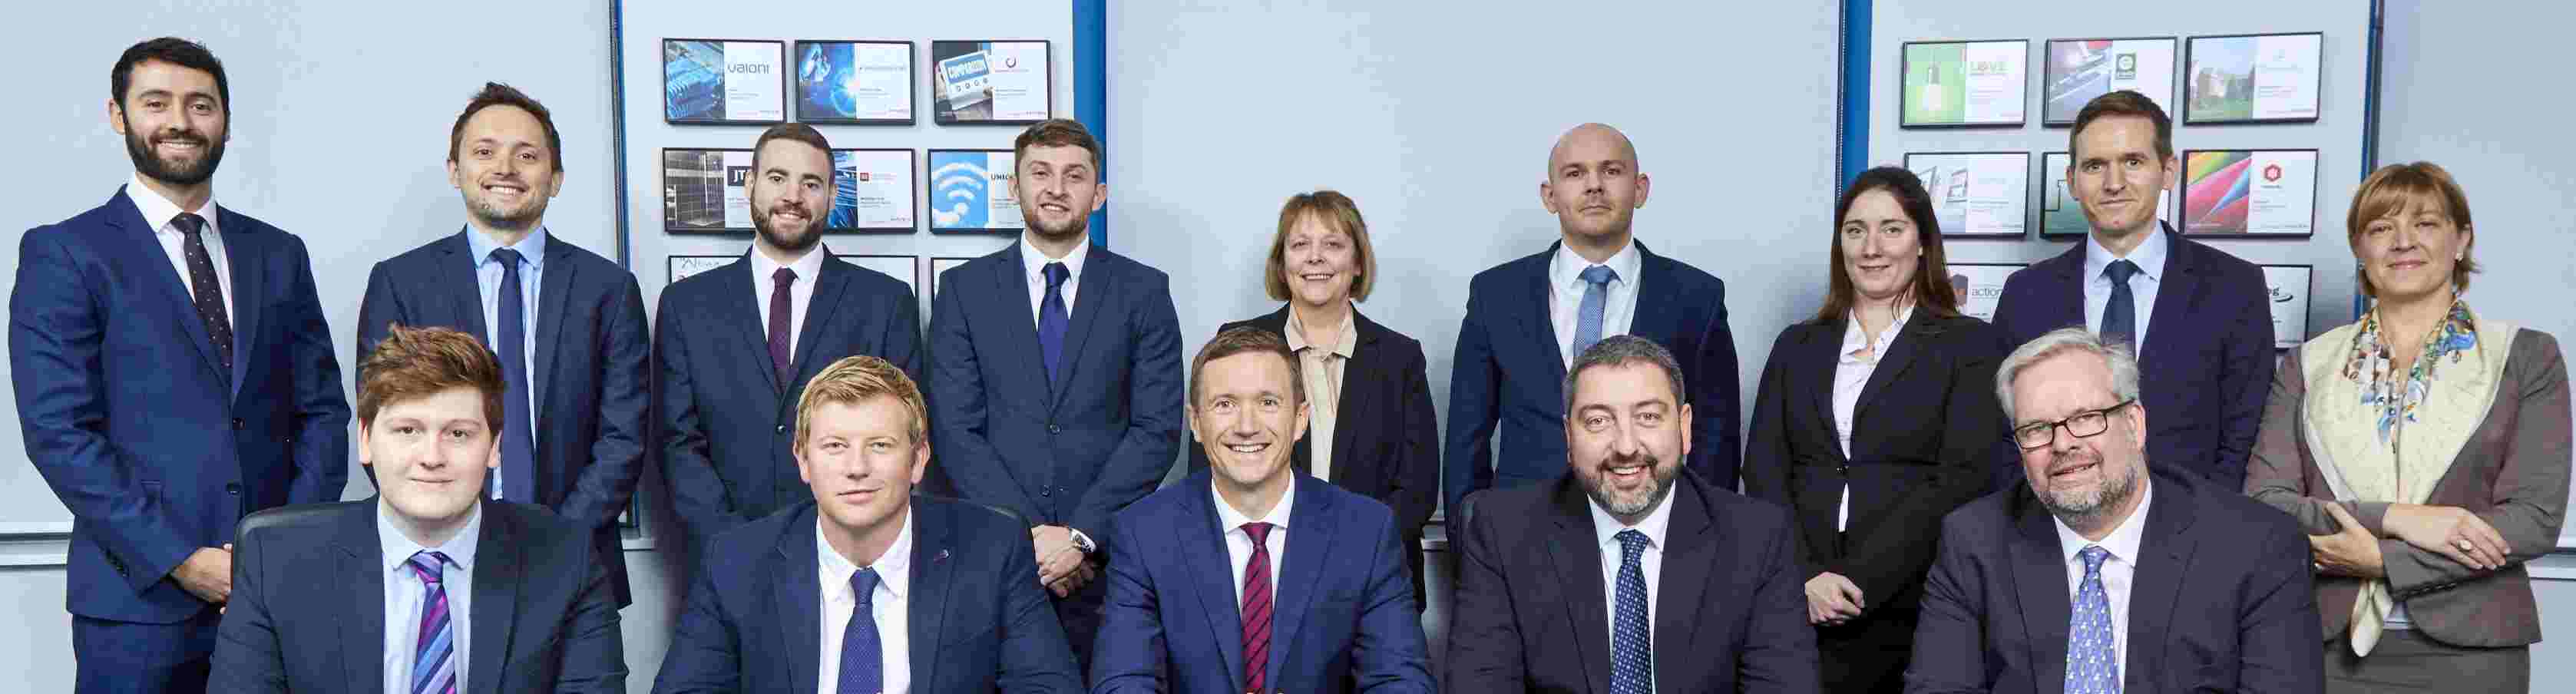 NPIF Maven Equity Finance invests over £14 million in 2019